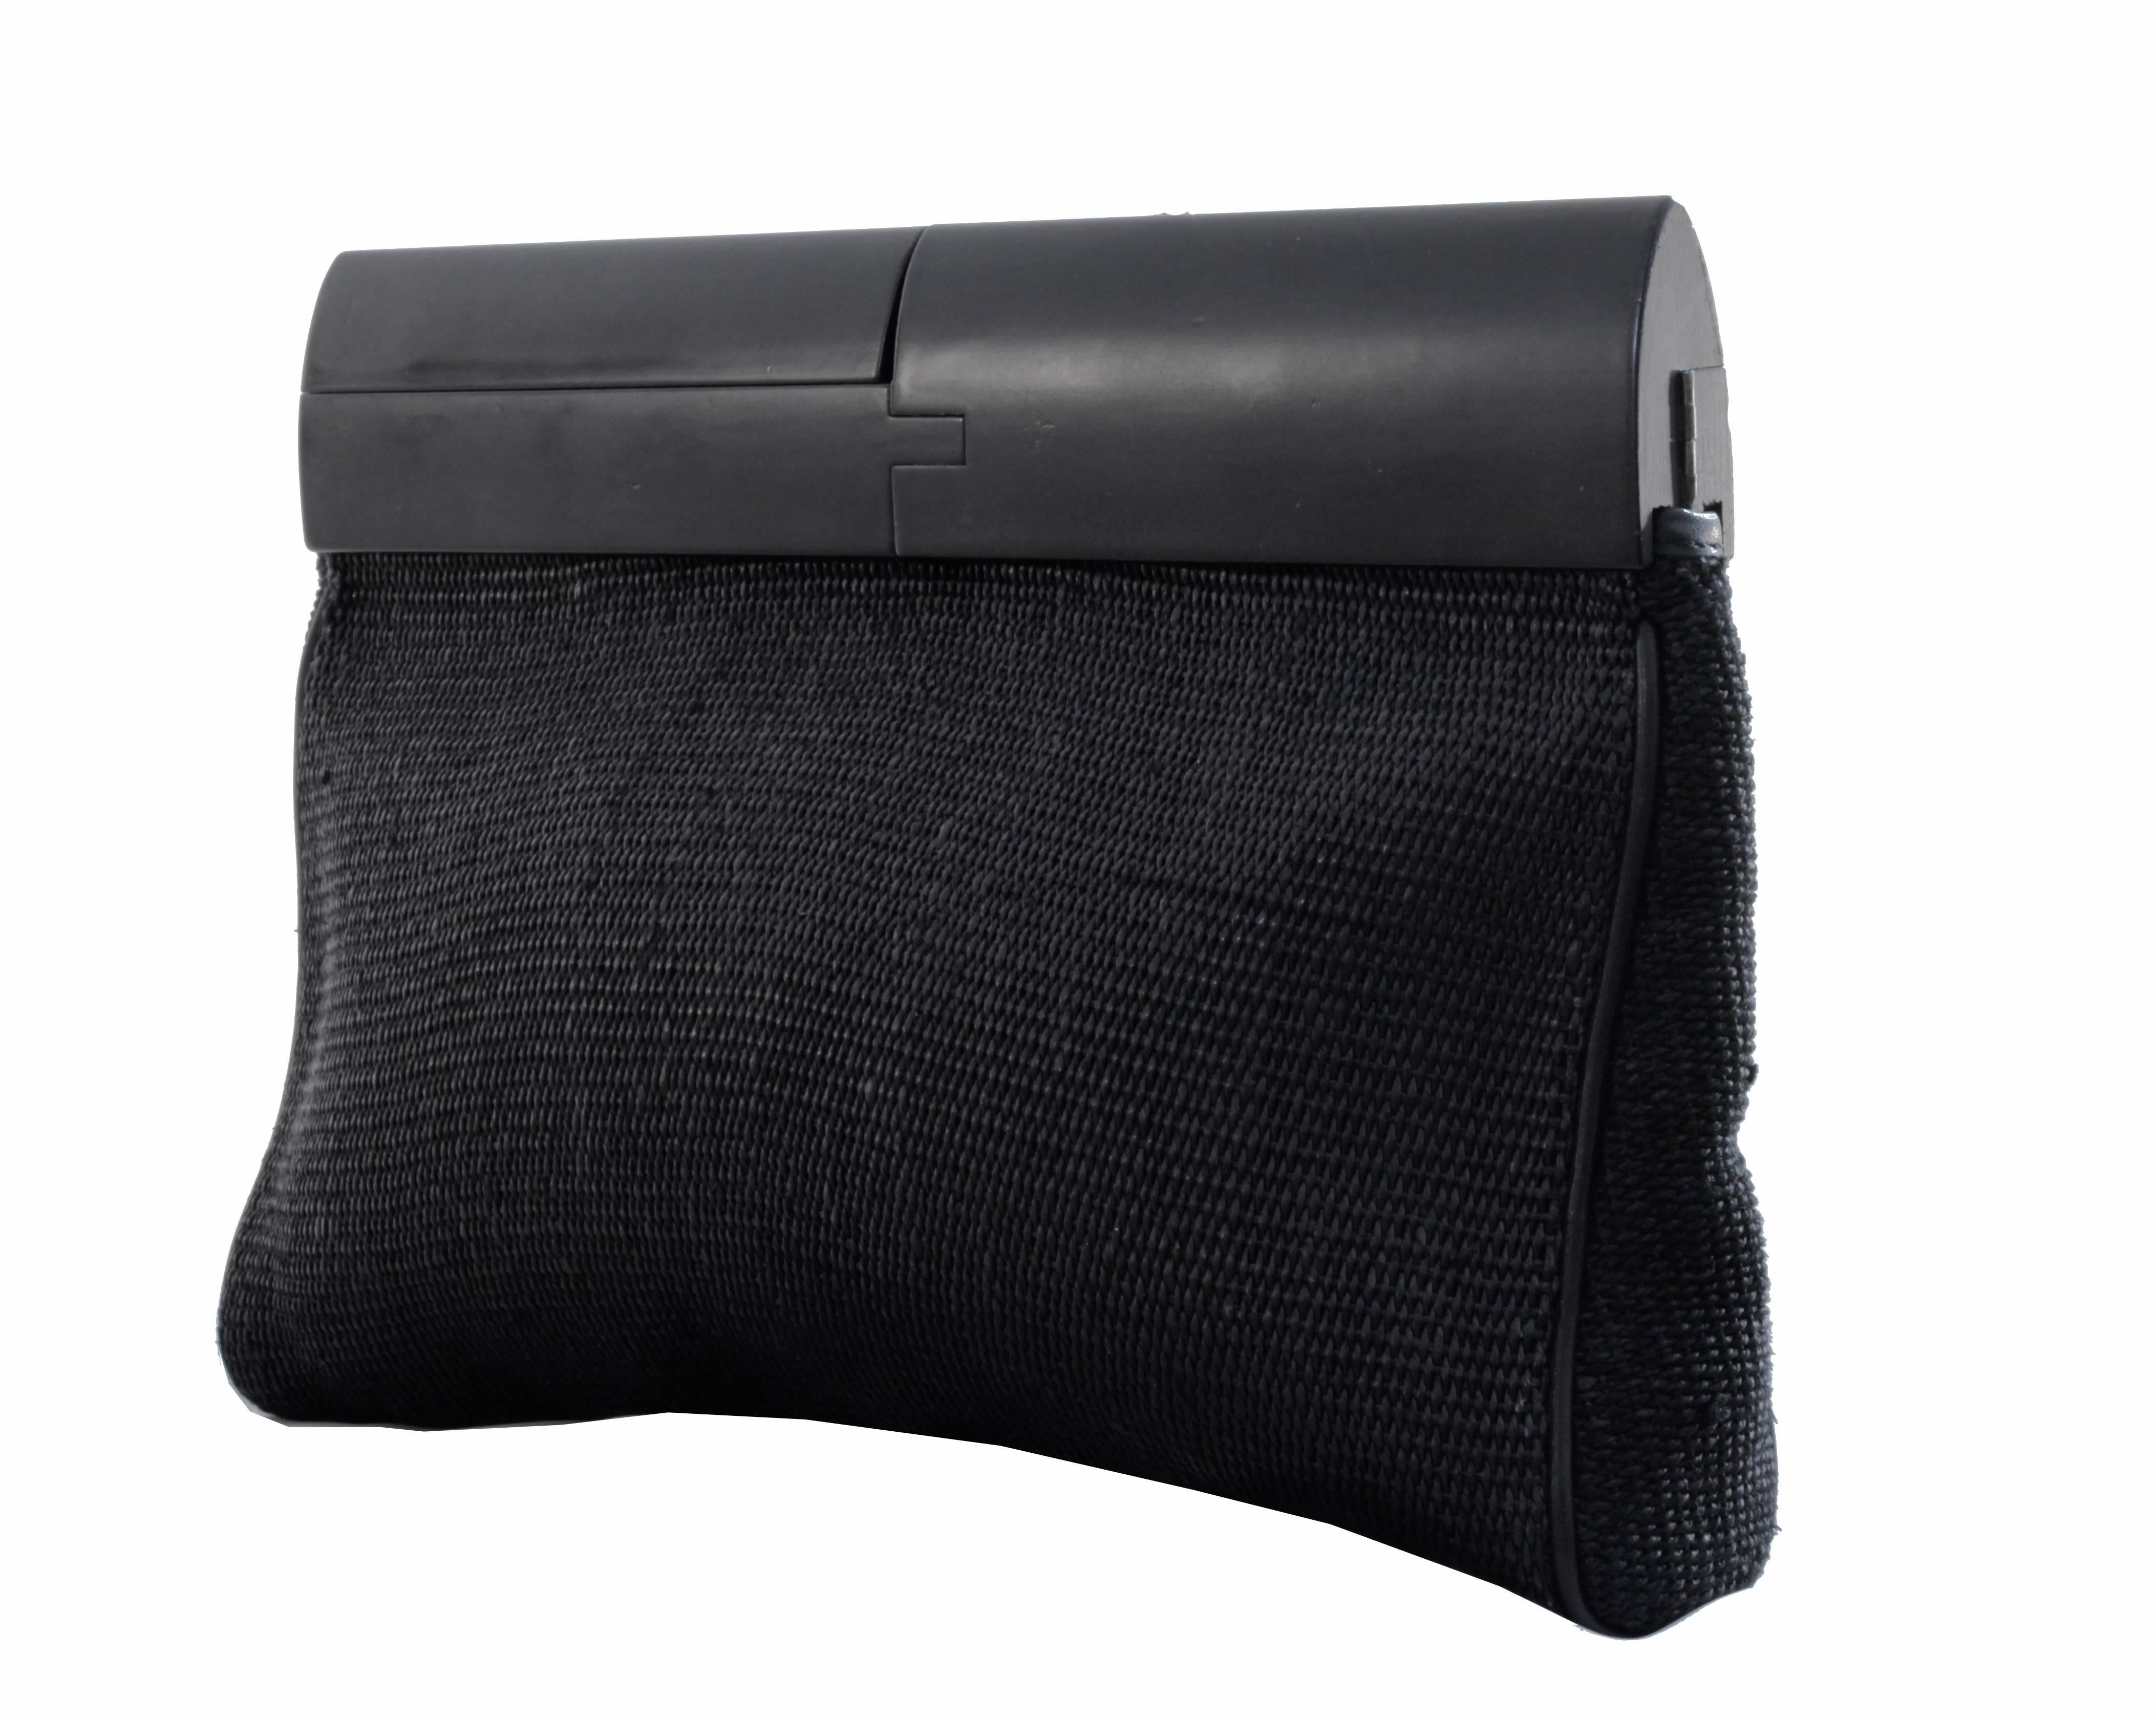 This fabulous black woven clutch was manufactured by De Vecchi of Italy and designed by Hamilton Hodge, who did stints for Bottega Veneta, Donna Karan and Ferragamo, most likely in the early 1990s.  Made from what we believe is a silk/cotton blend